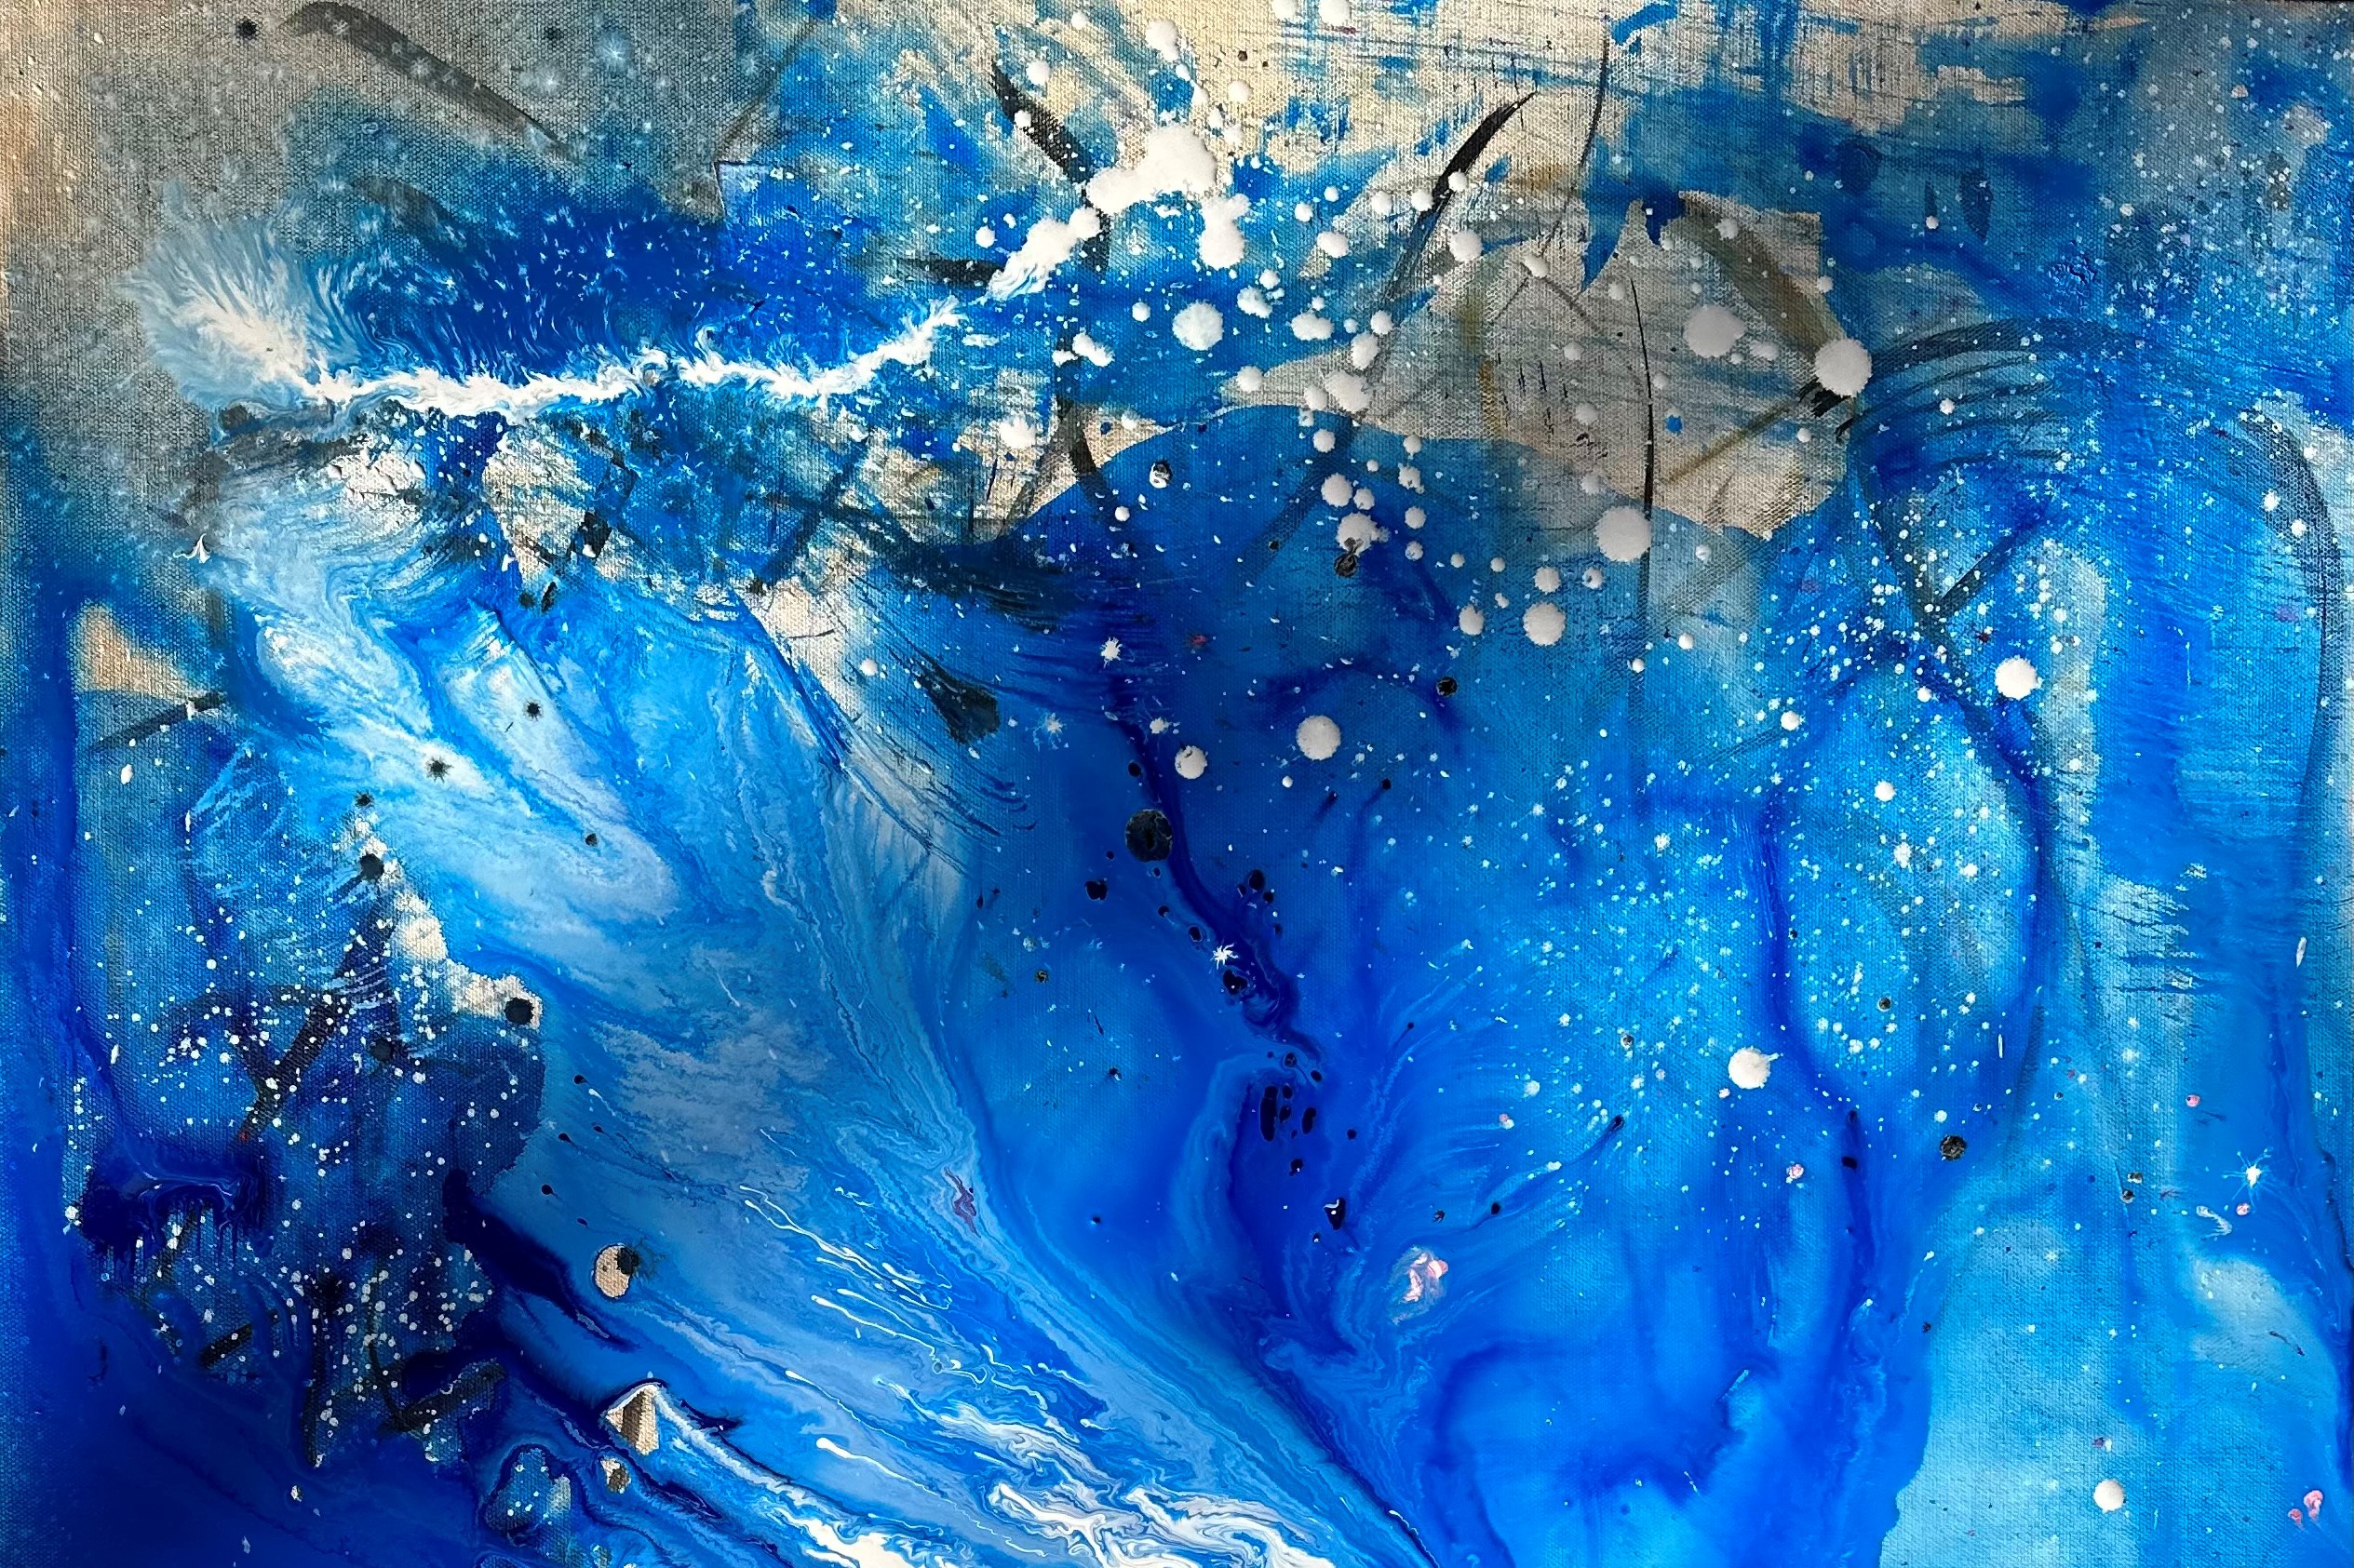 A blue abstract painting by Springfield artist Carol Snyder